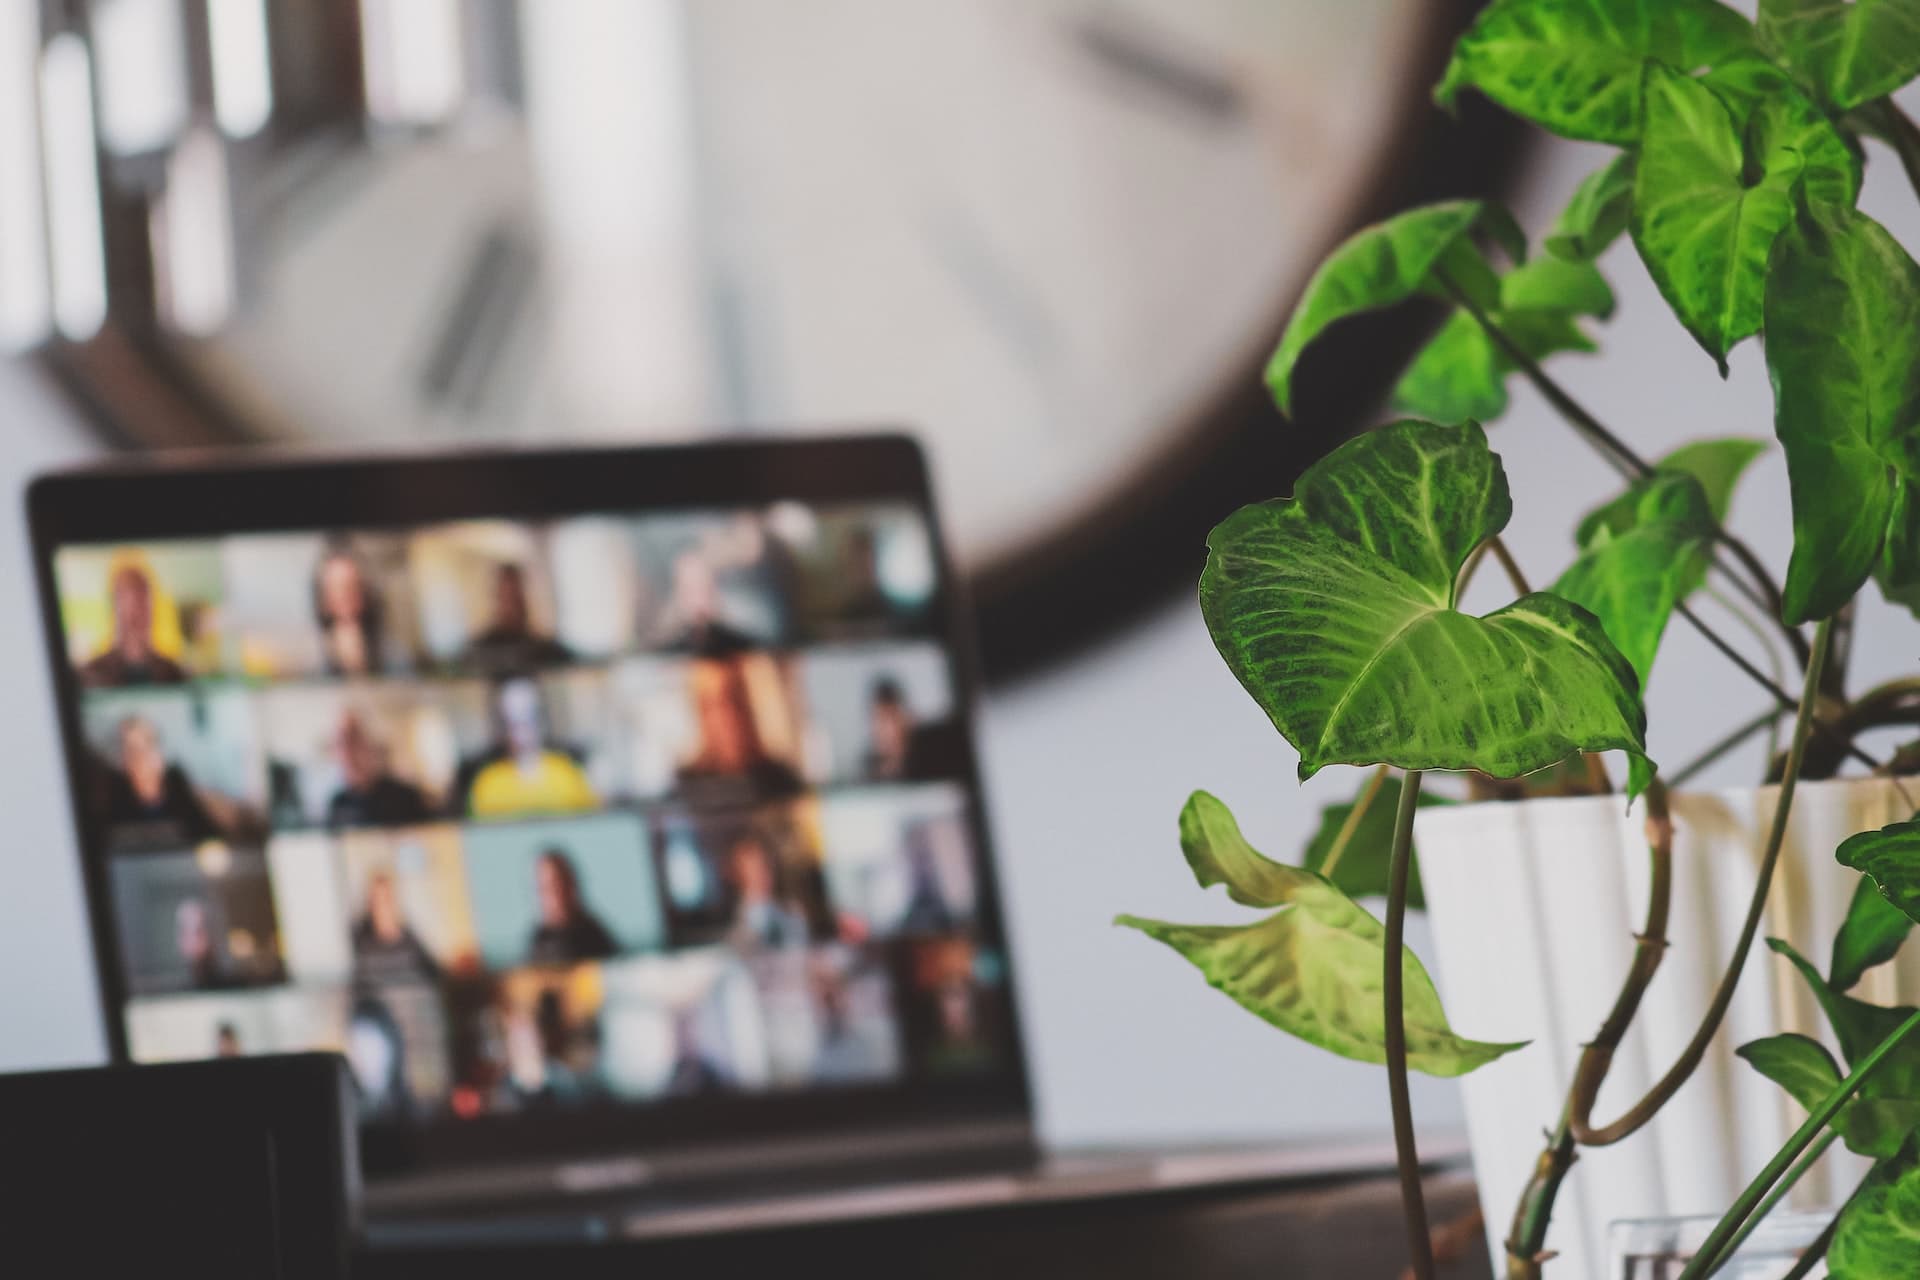 A picture of an out of focus laptop with multiple faces participating in an online meeting with a green plant in the foreground